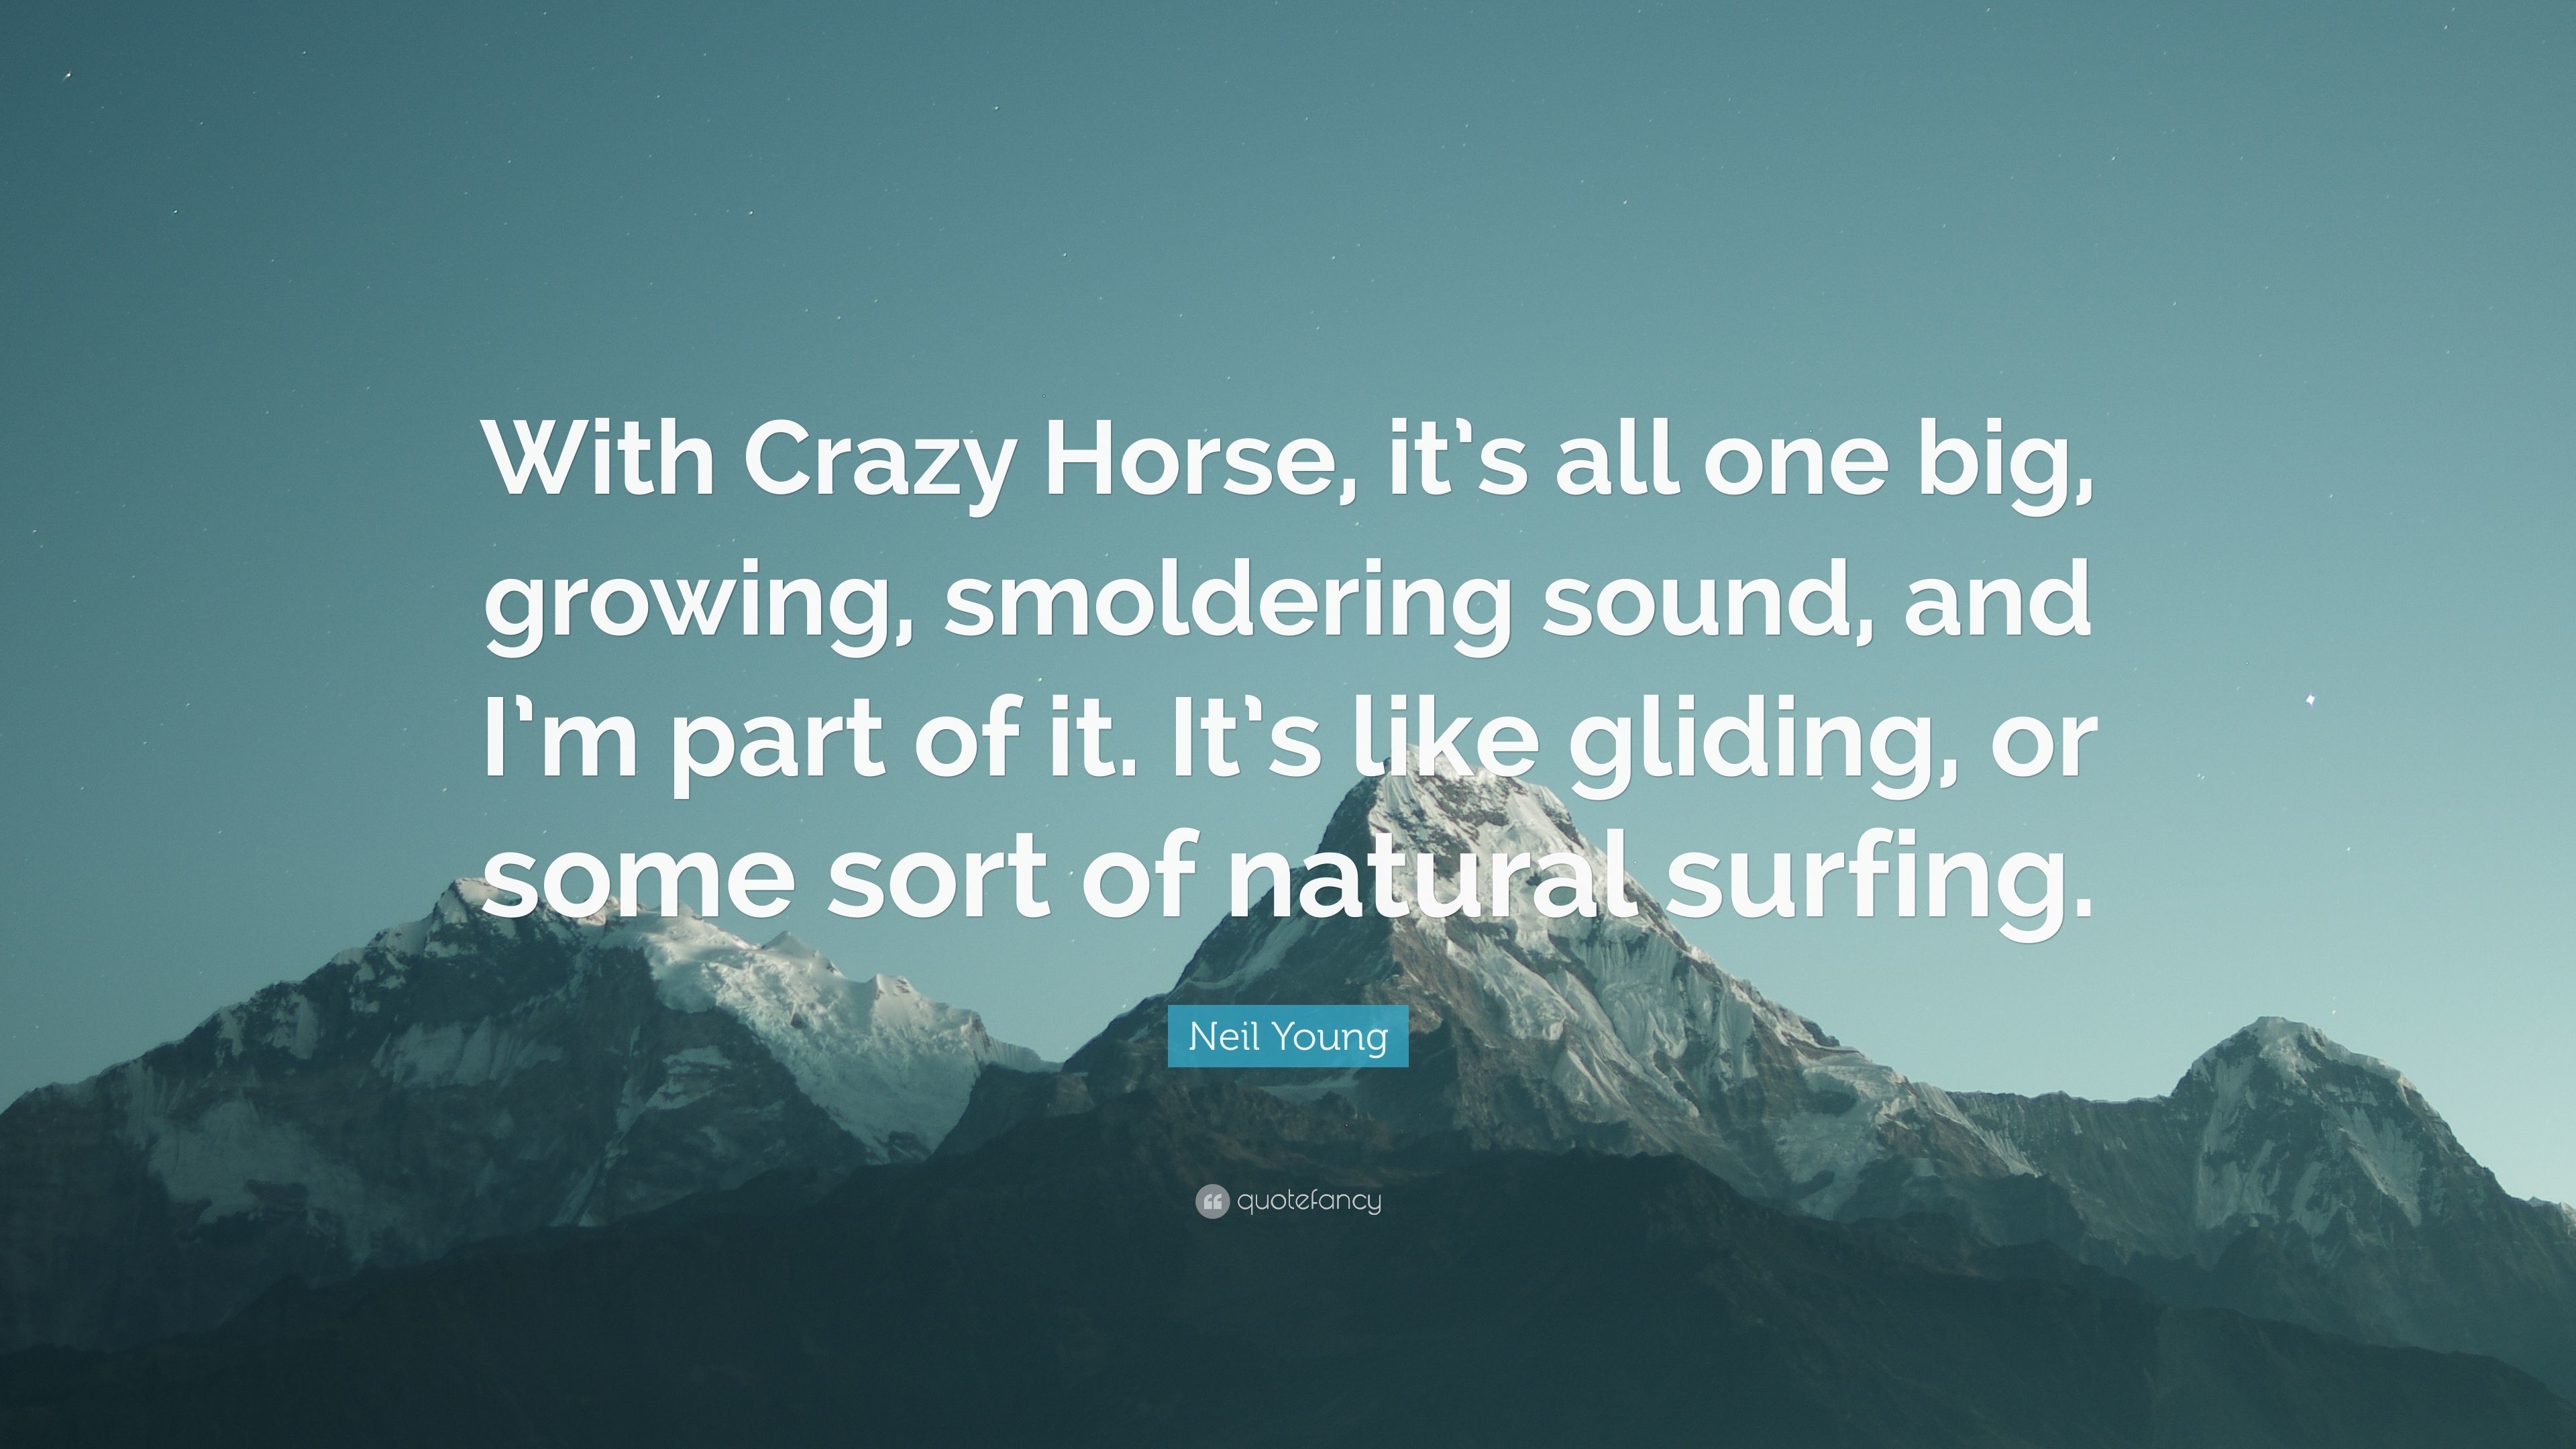 3840x2160 Neil Young Quote: “With Crazy Horse, it's all one big, growing,